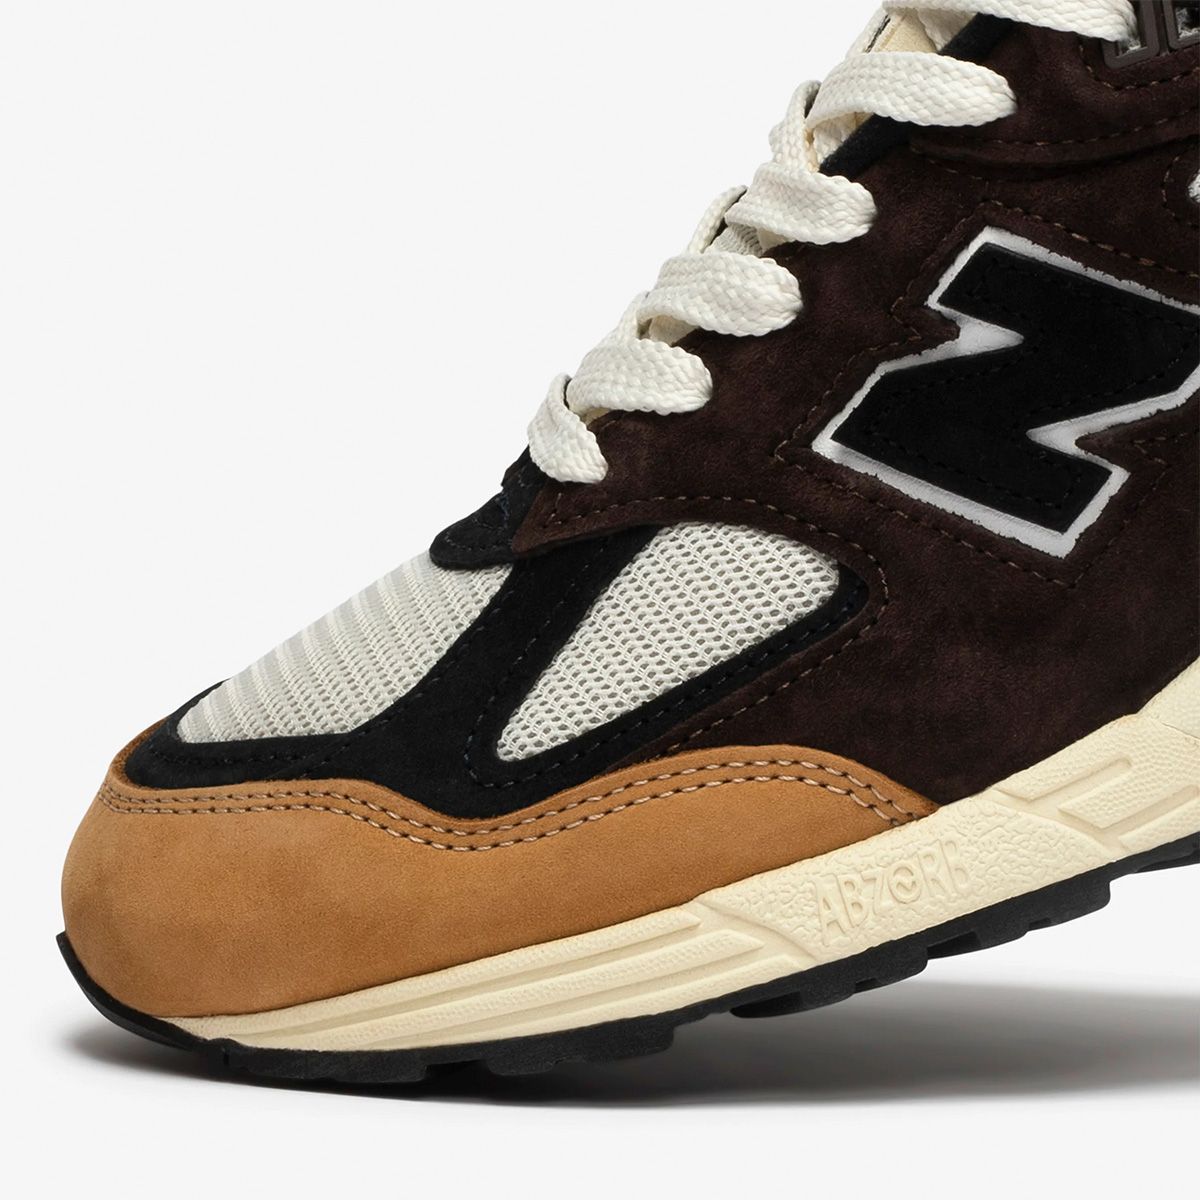 The New Balance 990v2 Appears in Cream, Brown and Tan | House of Heat°